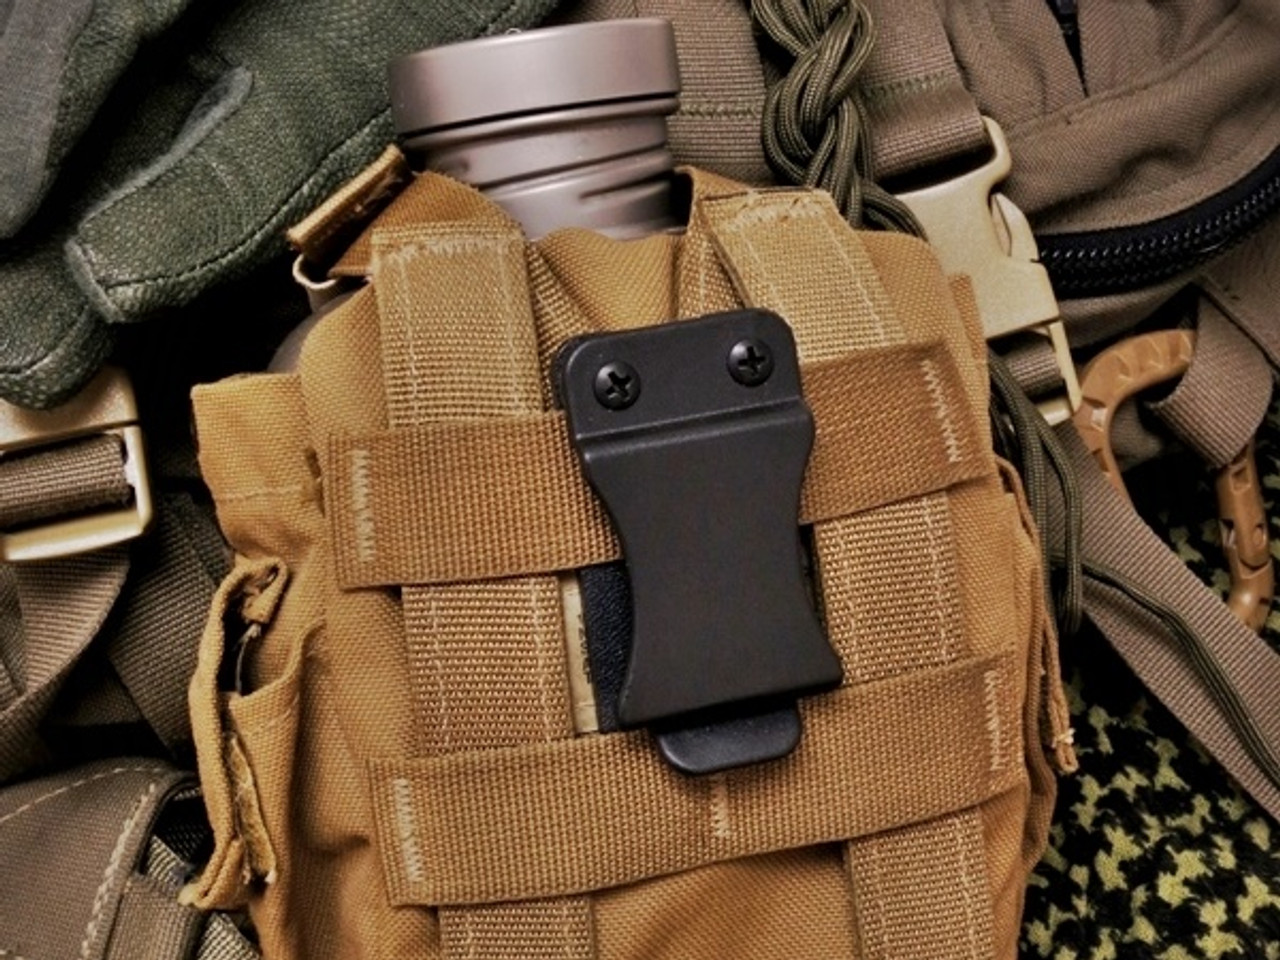 Best MOLLE Clips and Connectors. If you've got tactical gear with MOLLE…, by Fit At Midlife